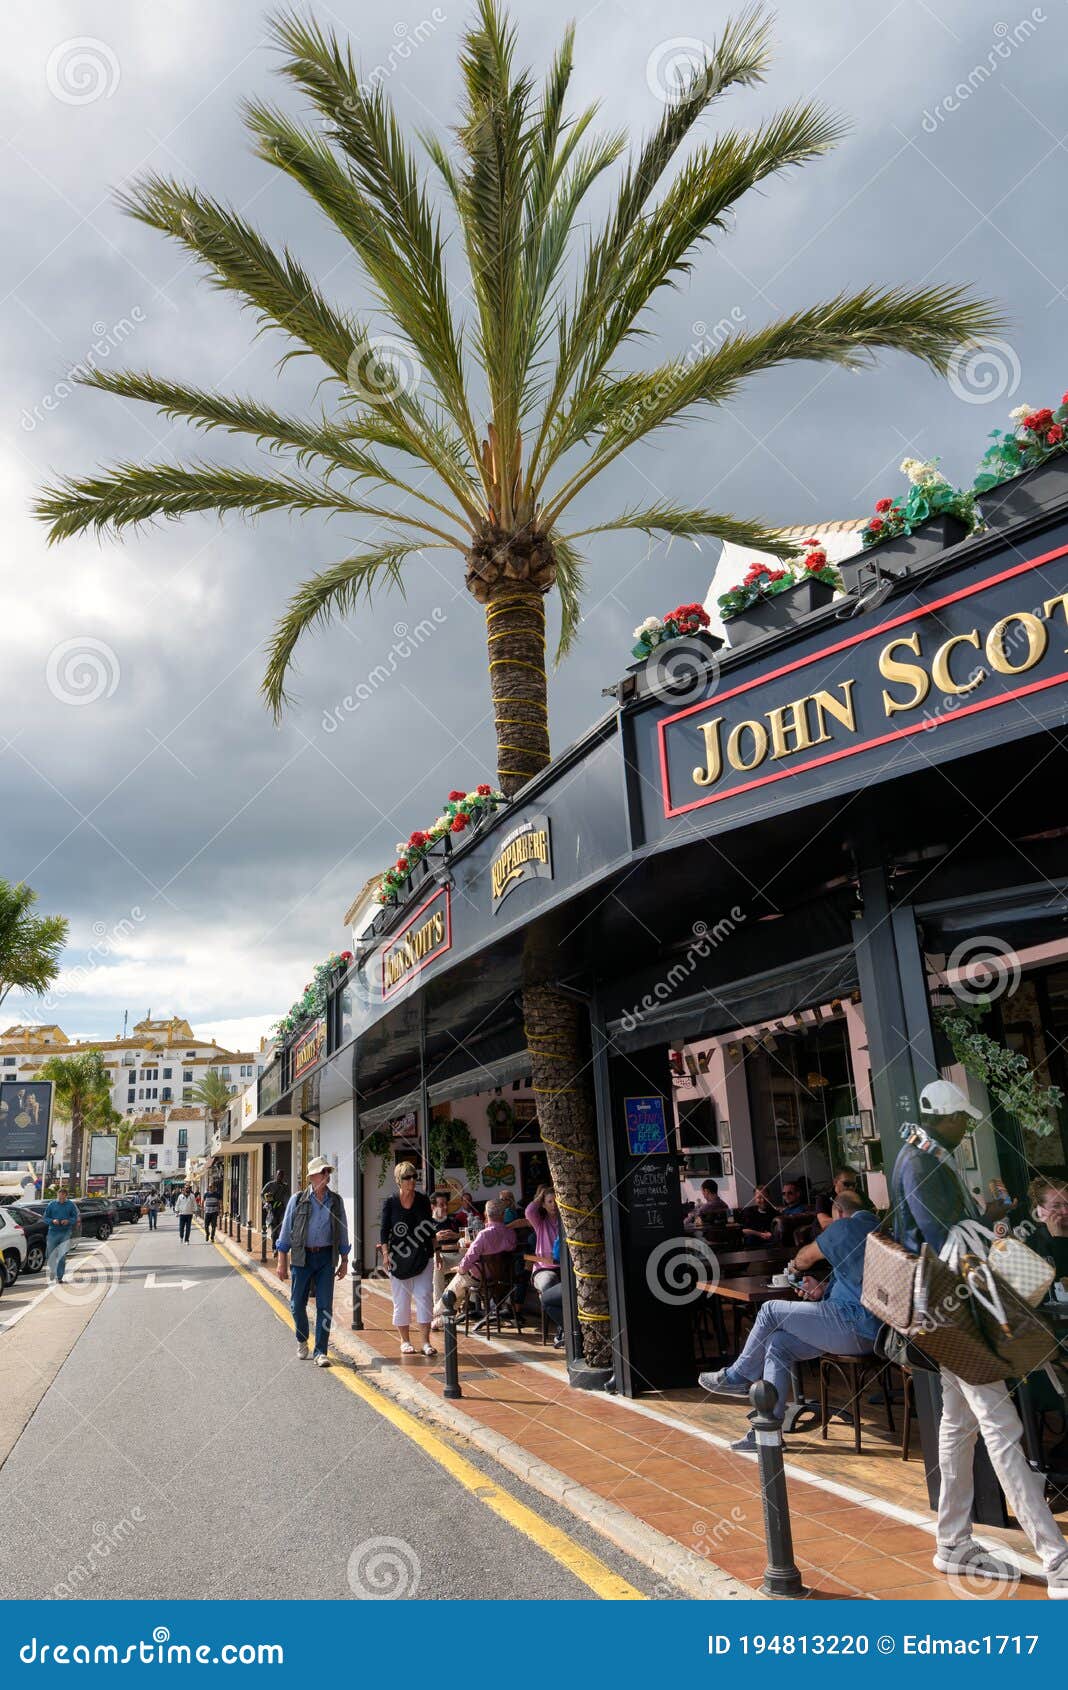 View of City Street Lined with Restaurants in Puerto Banus, Marbella,  Spain. Editorial Image - Image of people, exterior: 194813220